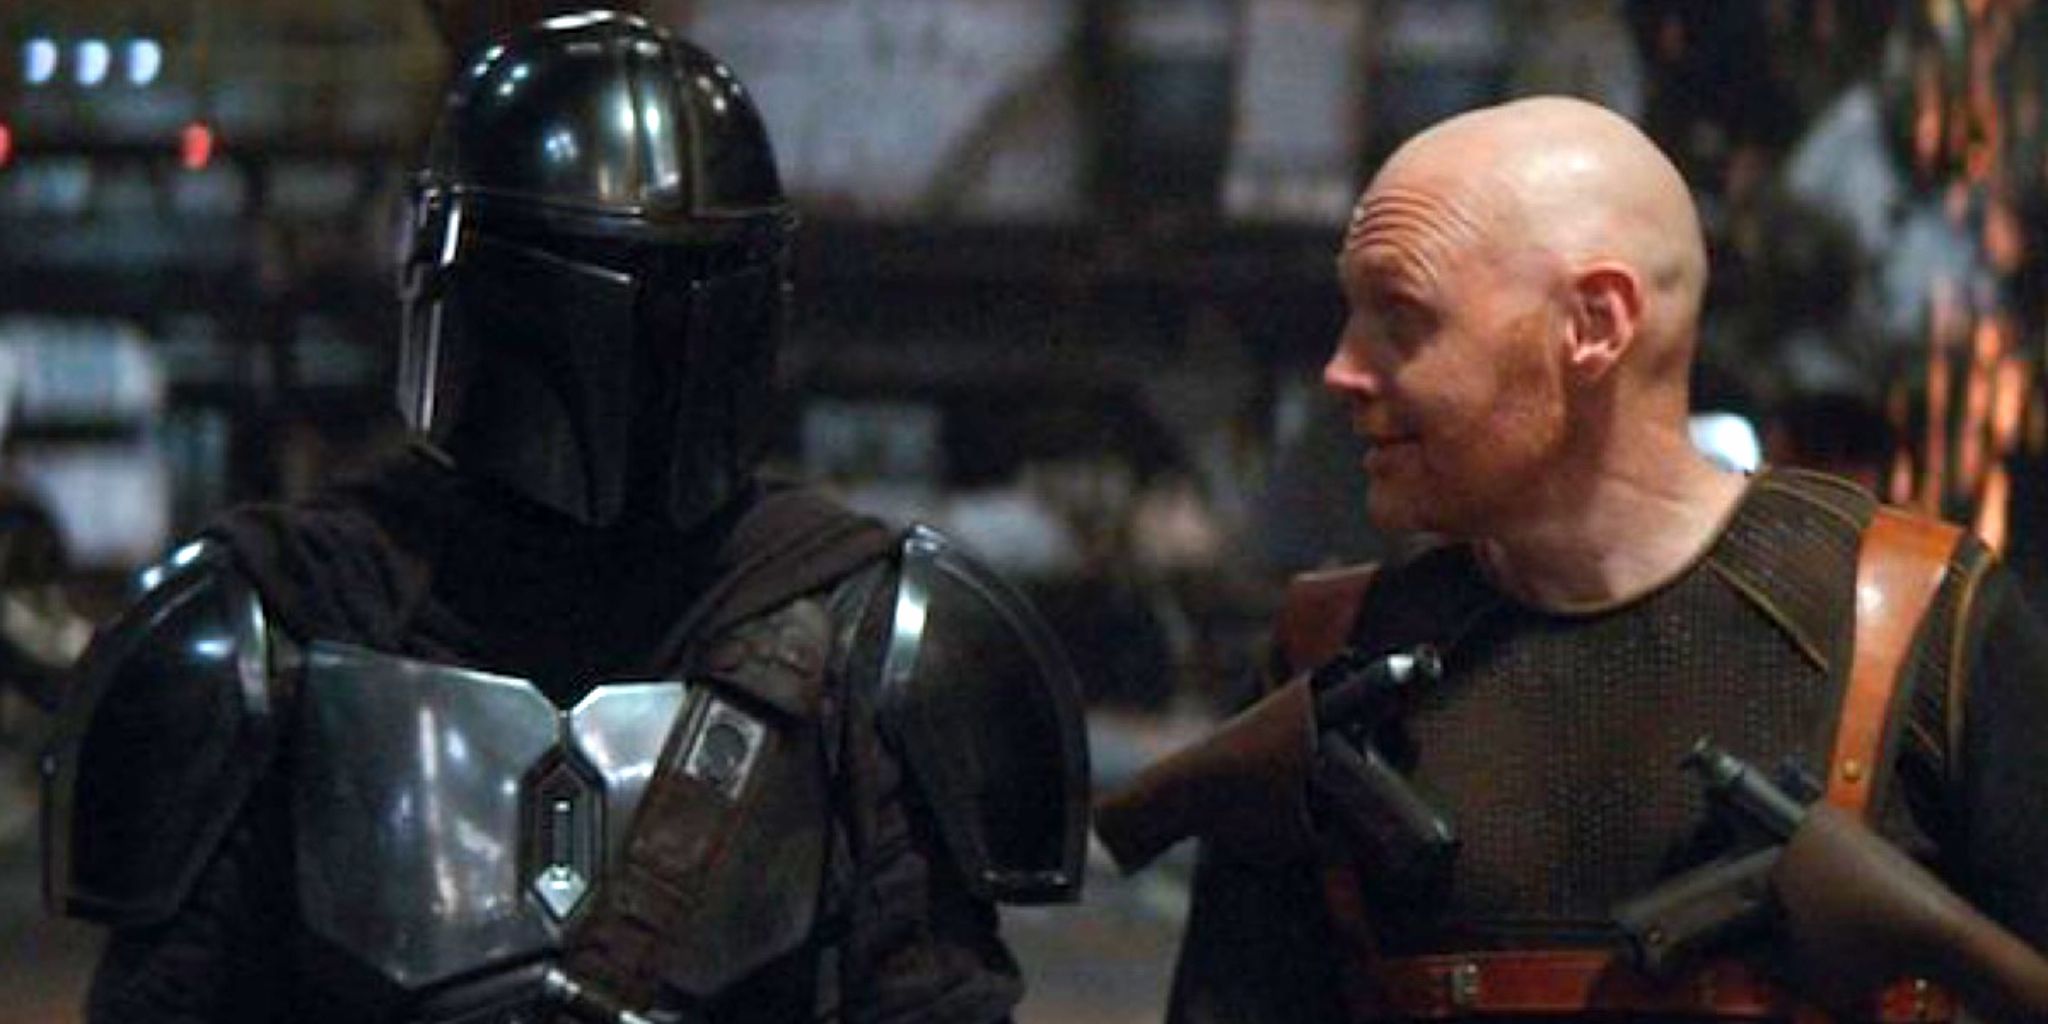 Din Djarin (Pedro Pascal) and Migs Mayfeld (Bill Burr) standing side by side in The Mandalorian season 1 episode 6